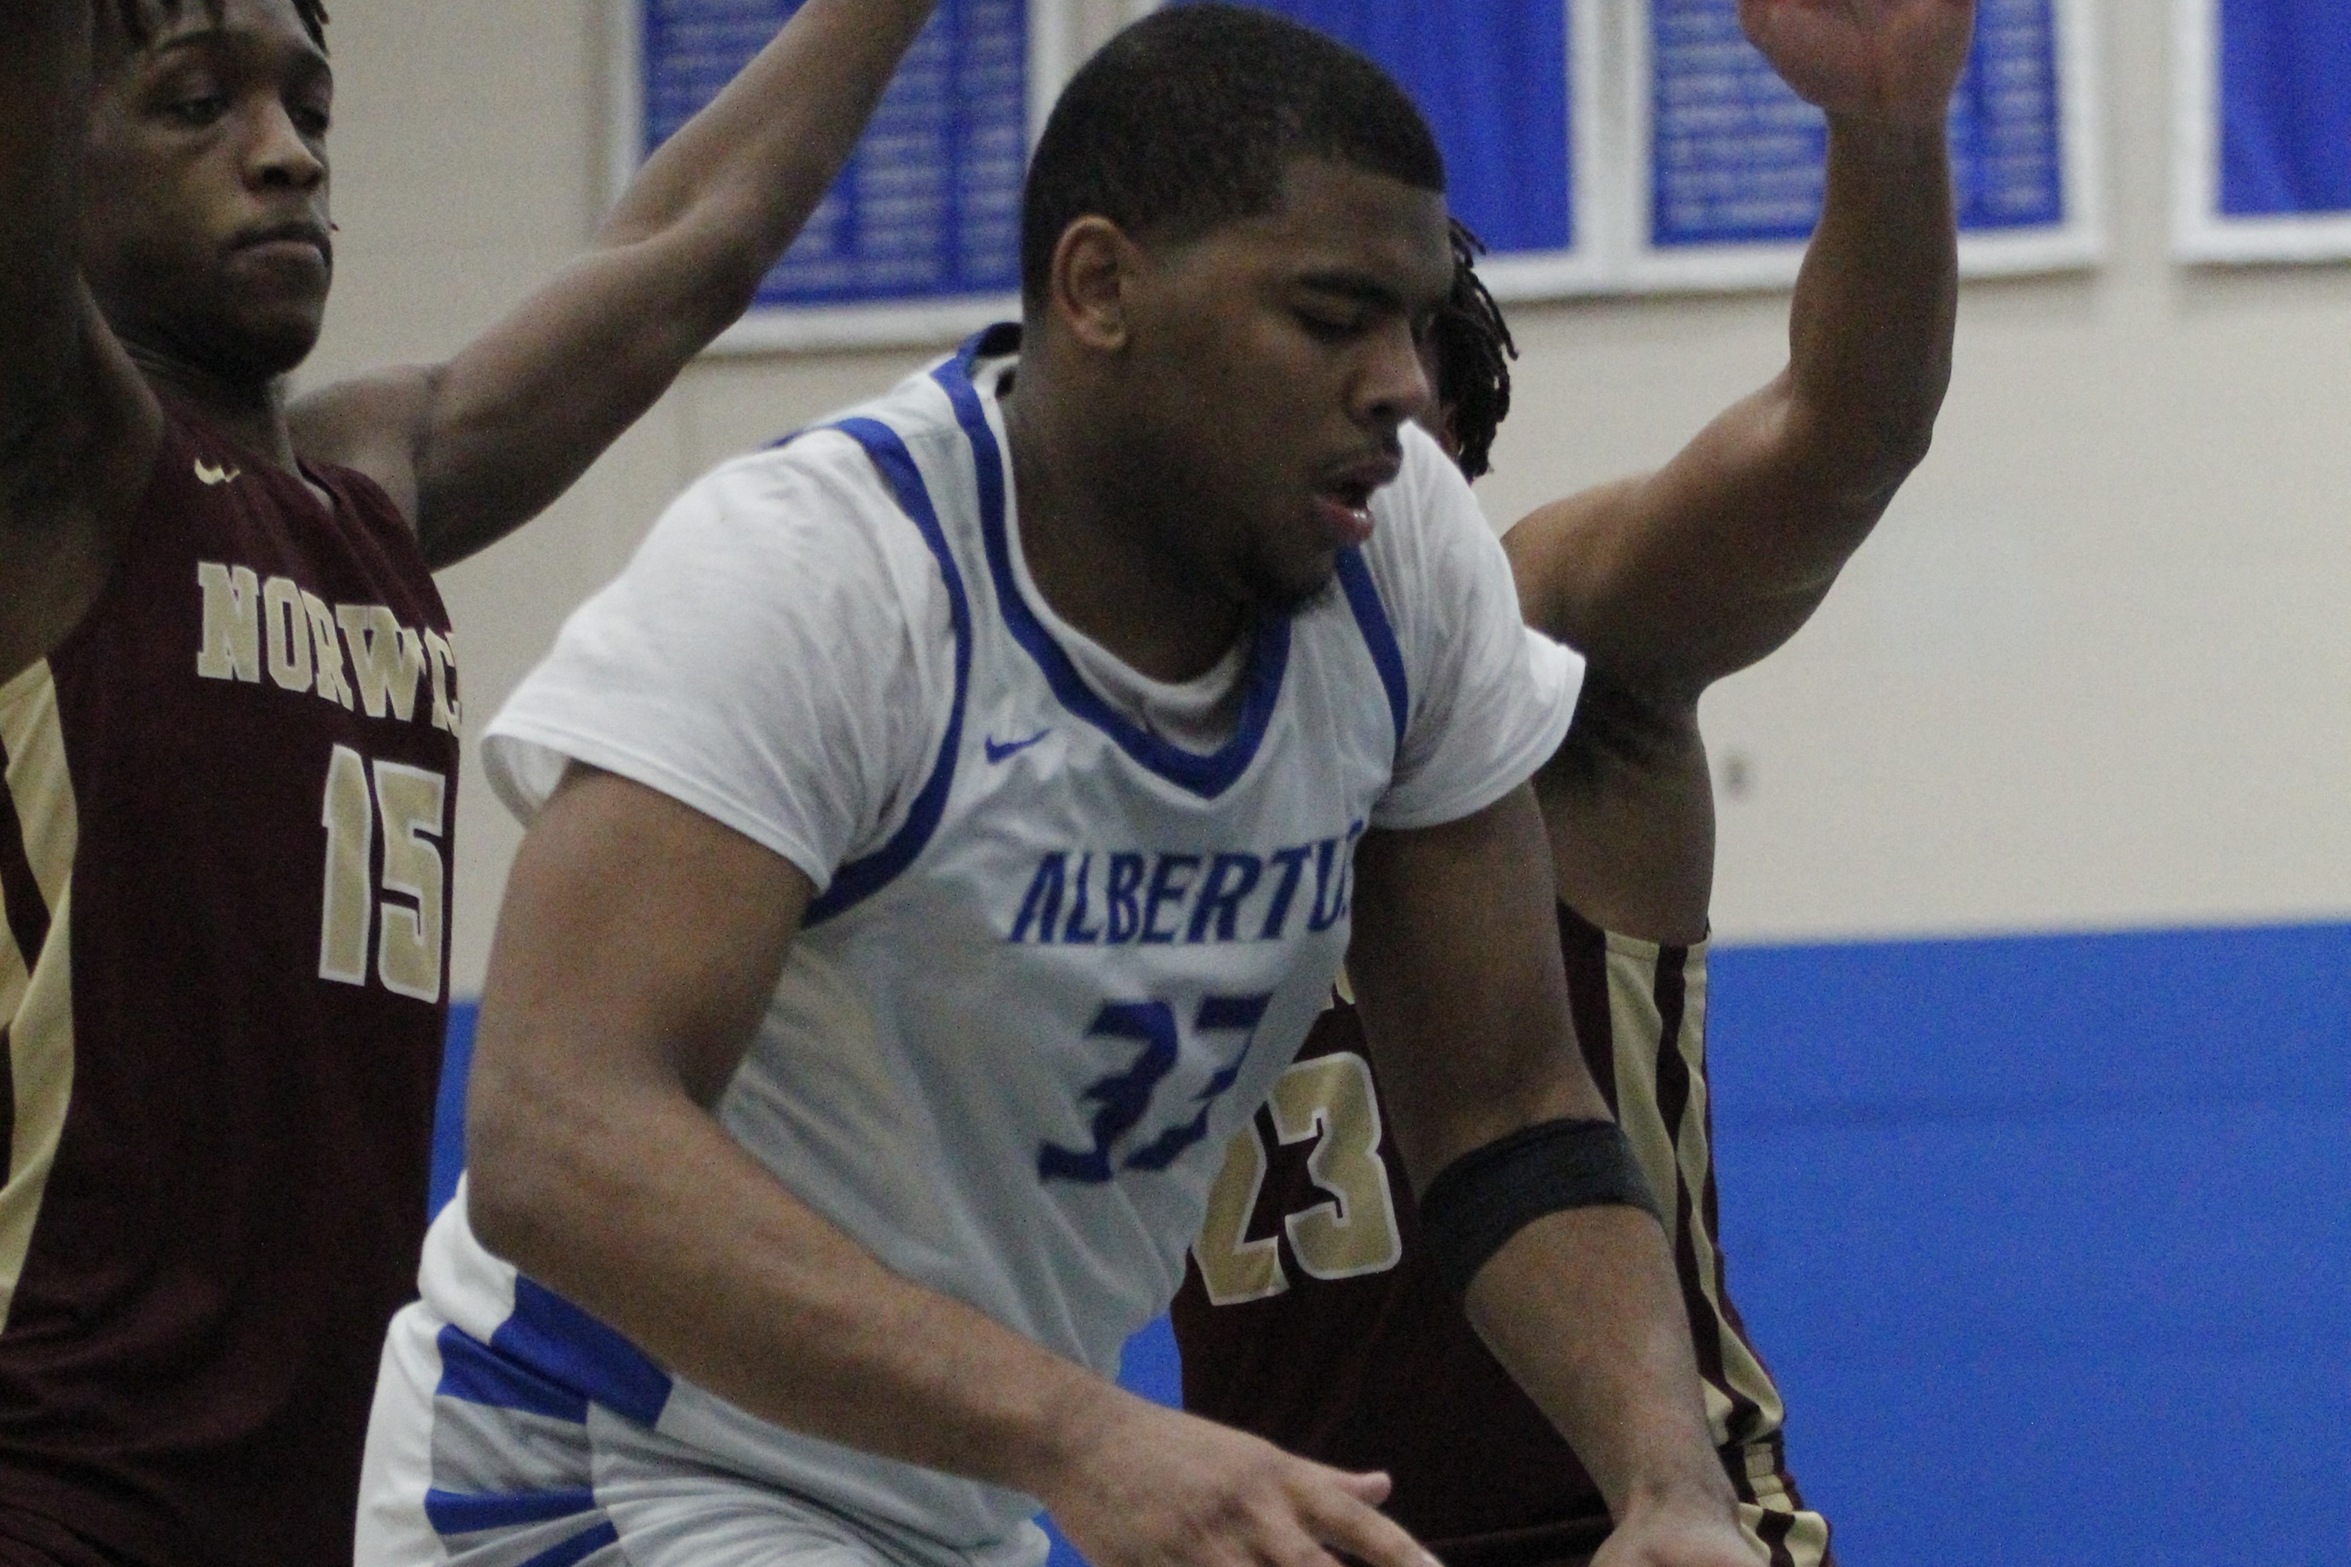 Men's Basketball Dominates Norwich From Start To Finish For Eighth Straight Win